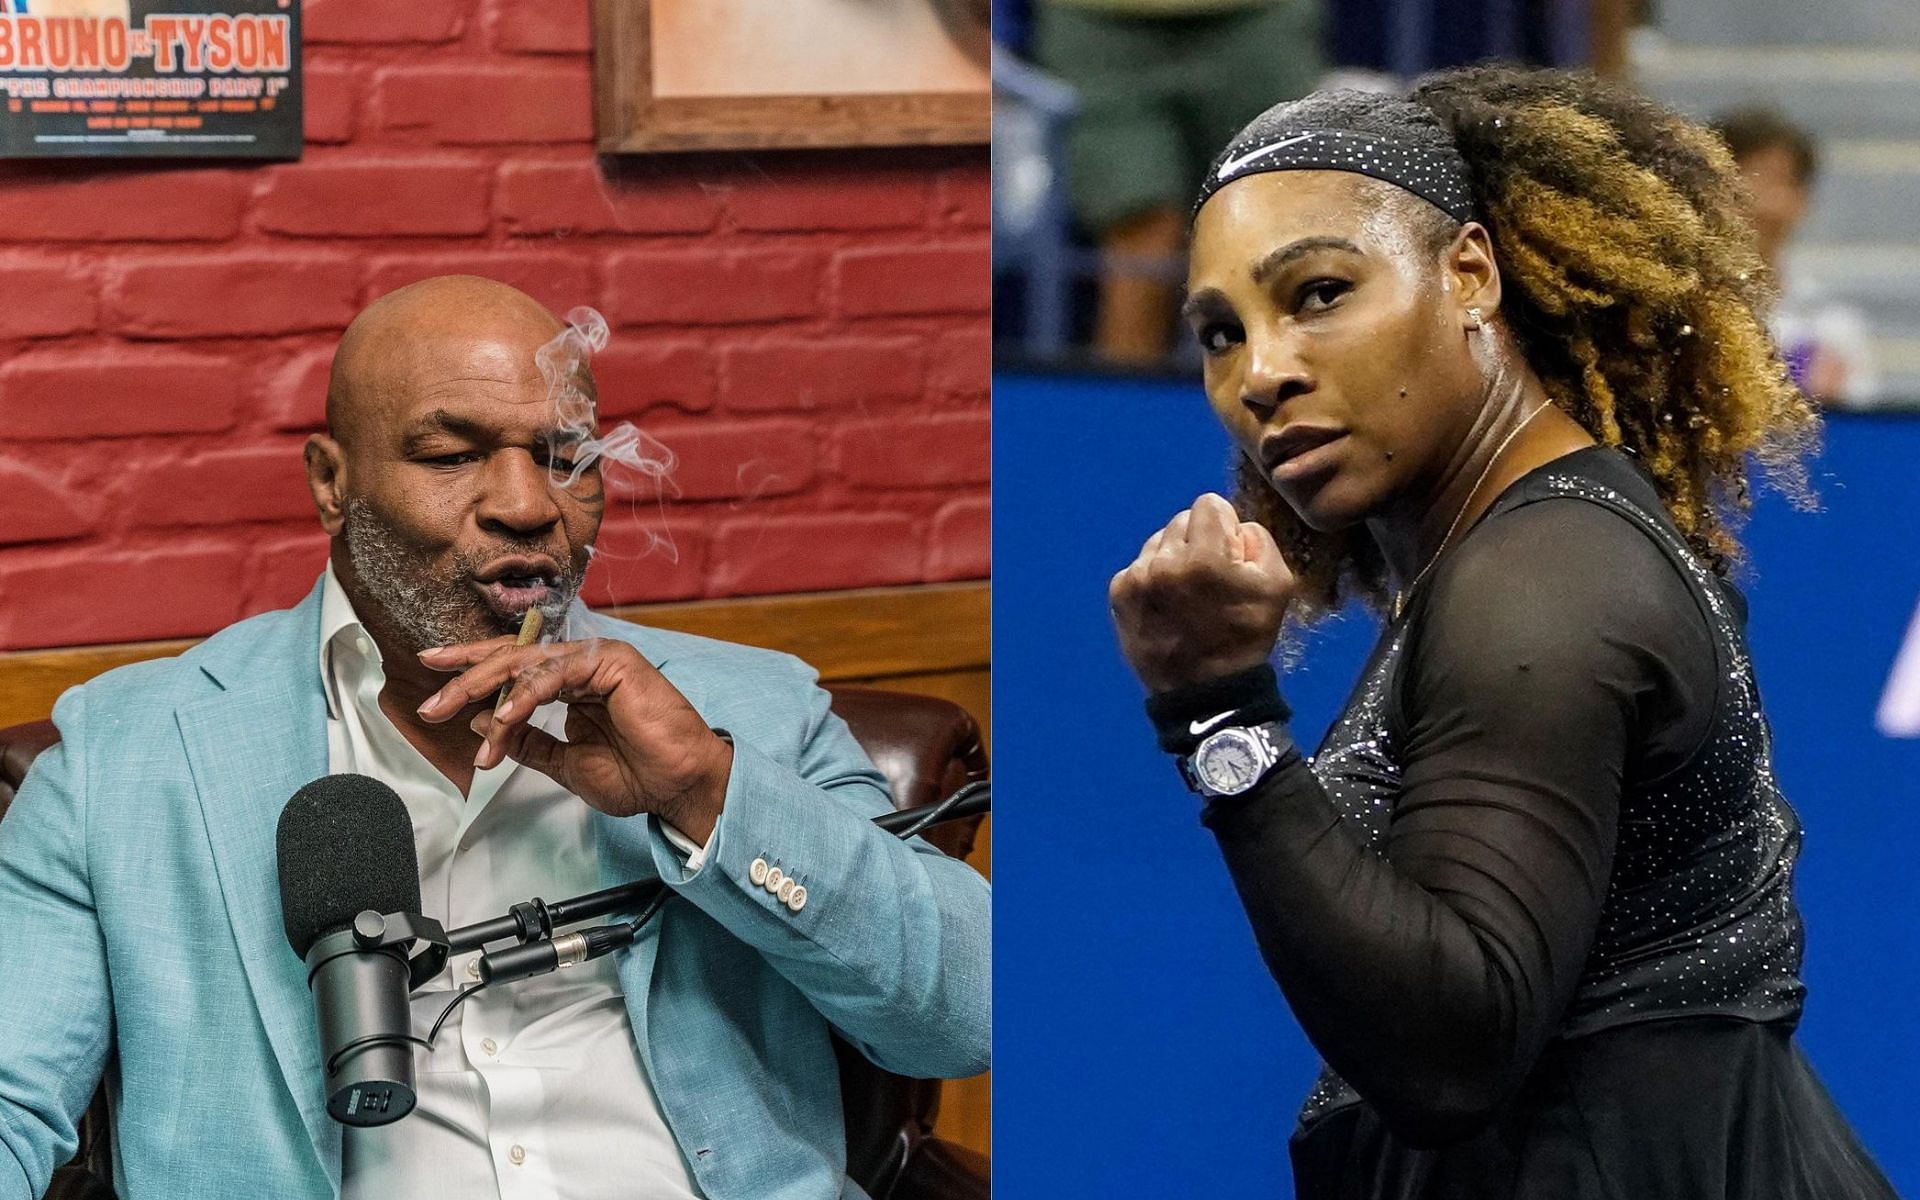 Mike Tyson and Serena Williams [Images via @miketyson and @usopen on Instagram]